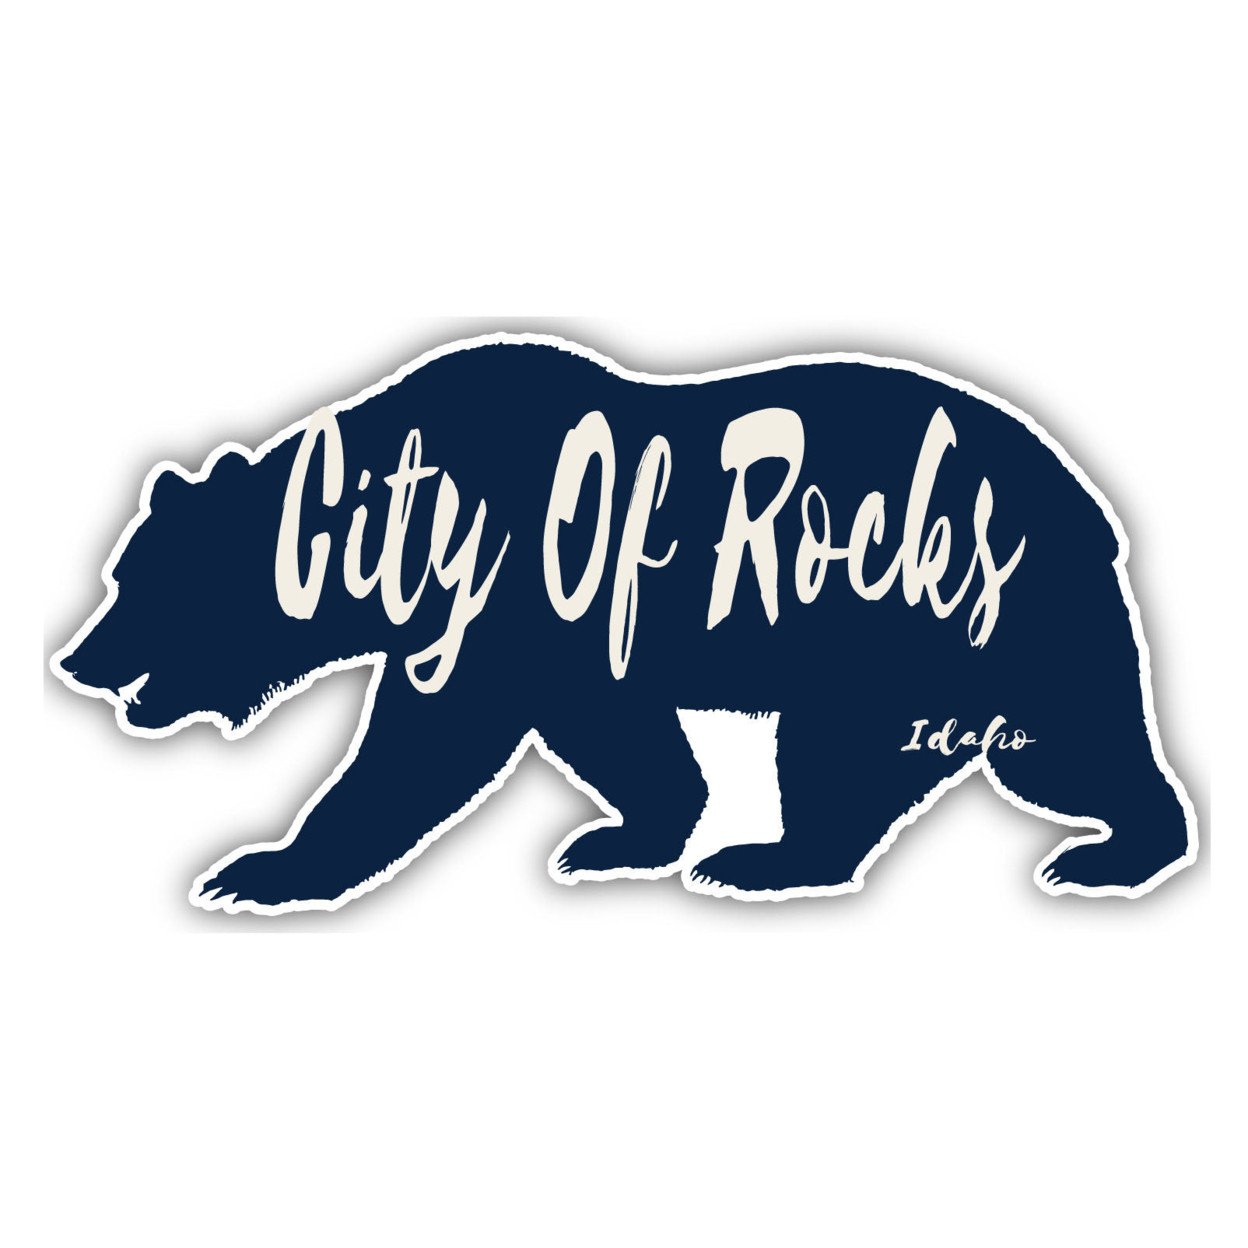 City Of Rocks Idaho Souvenir Decorative Stickers (Choose Theme And Size) - 4-Pack, 10-Inch, Tent